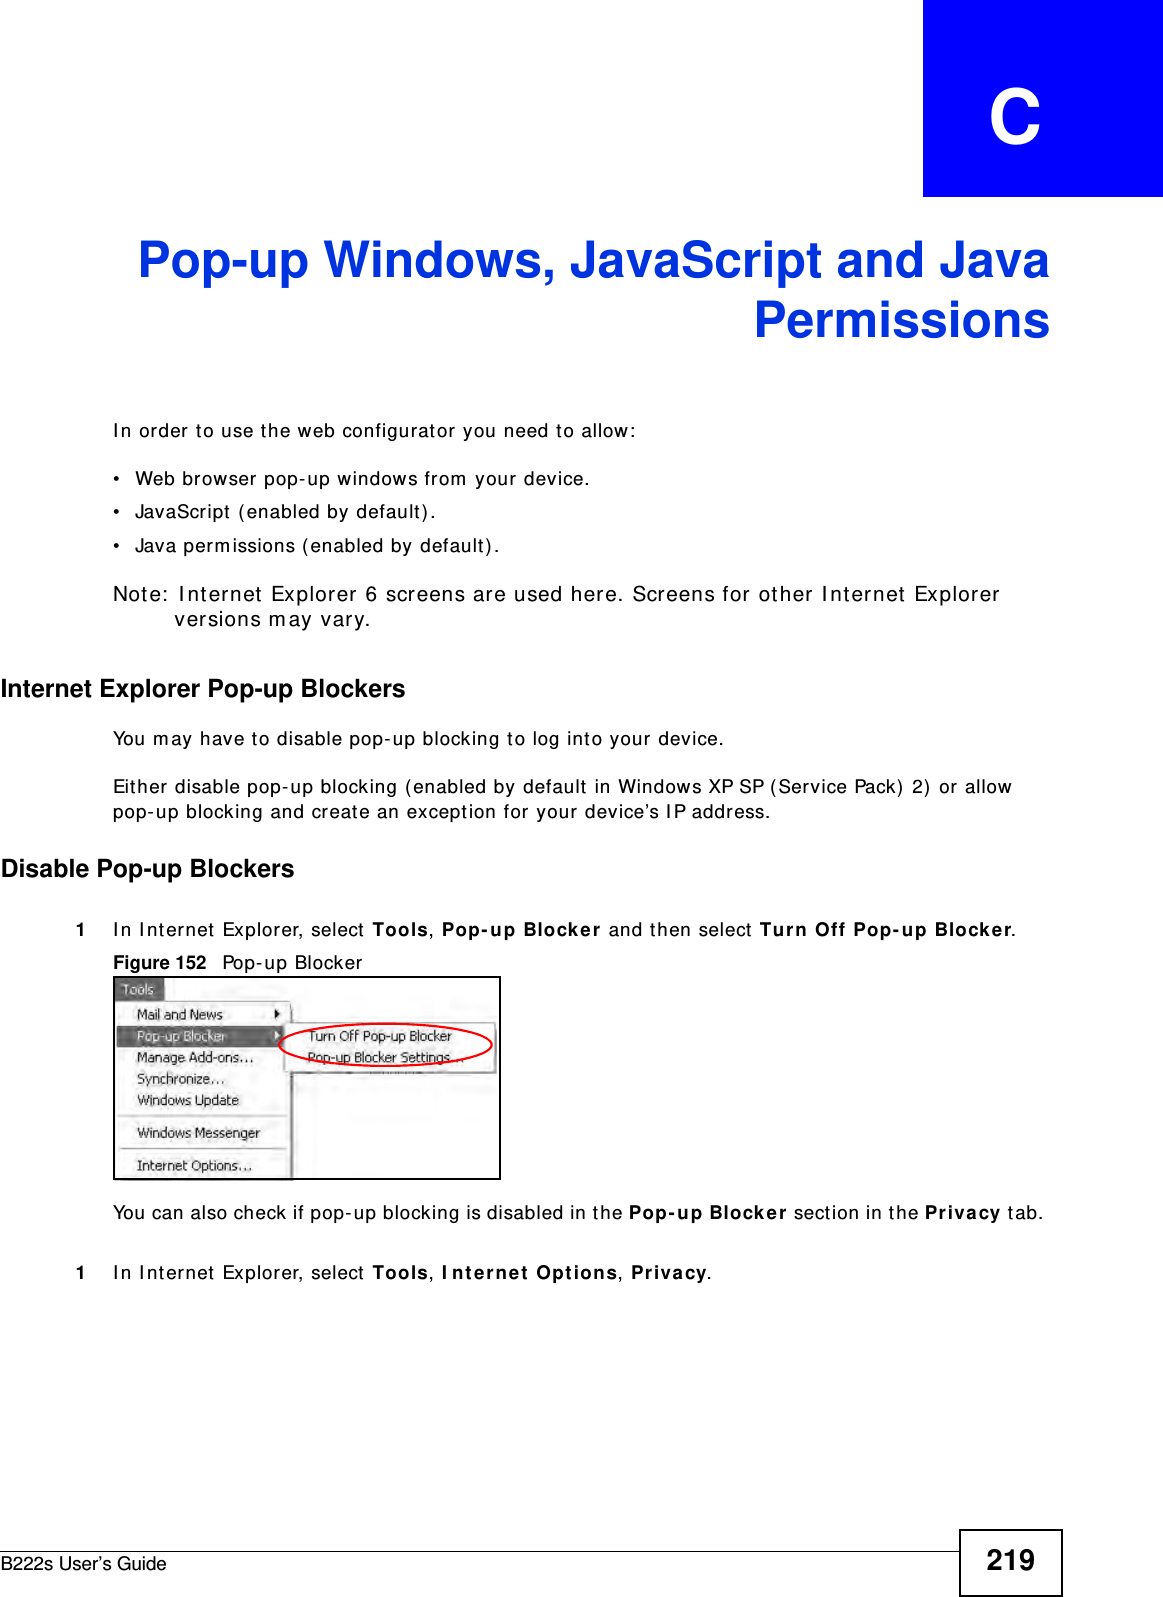 B222s User’s Guide 219APPENDIX   CPop-up Windows, JavaScript and JavaPermissionsI n order t o use t he web configurat or you need t o allow:• Web browser pop- up windows from  your device.• JavaScript  ( enabled by default ).• Java perm issions ( enabled by default) .Not e:  I nt ernet Explorer 6 screens are used here. Screens for other I nternet  Explorer versions m ay vary.Internet Explorer Pop-up BlockersYou m ay have t o disable pop- up blocking to log int o your device. Eit her disable pop- up blocking (enabled by default  in Windows XP SP ( Service Pack)  2)  or allow pop- up blocking and creat e an except ion for your device’s I P address.Disable Pop-up Blockers1I n I nternet Explor er, select  Tools, Pop- up Blocker and then select  Tur n Off Pop- up Block e r. Figure 152   Pop- up BlockerYou can also check if pop- up blocking is disabled in t he Pop- up Block e r  sect ion in t he Privacy t ab. 1I n I nternet Explor er, select  Tools, I nt er net Options, Priva cy.